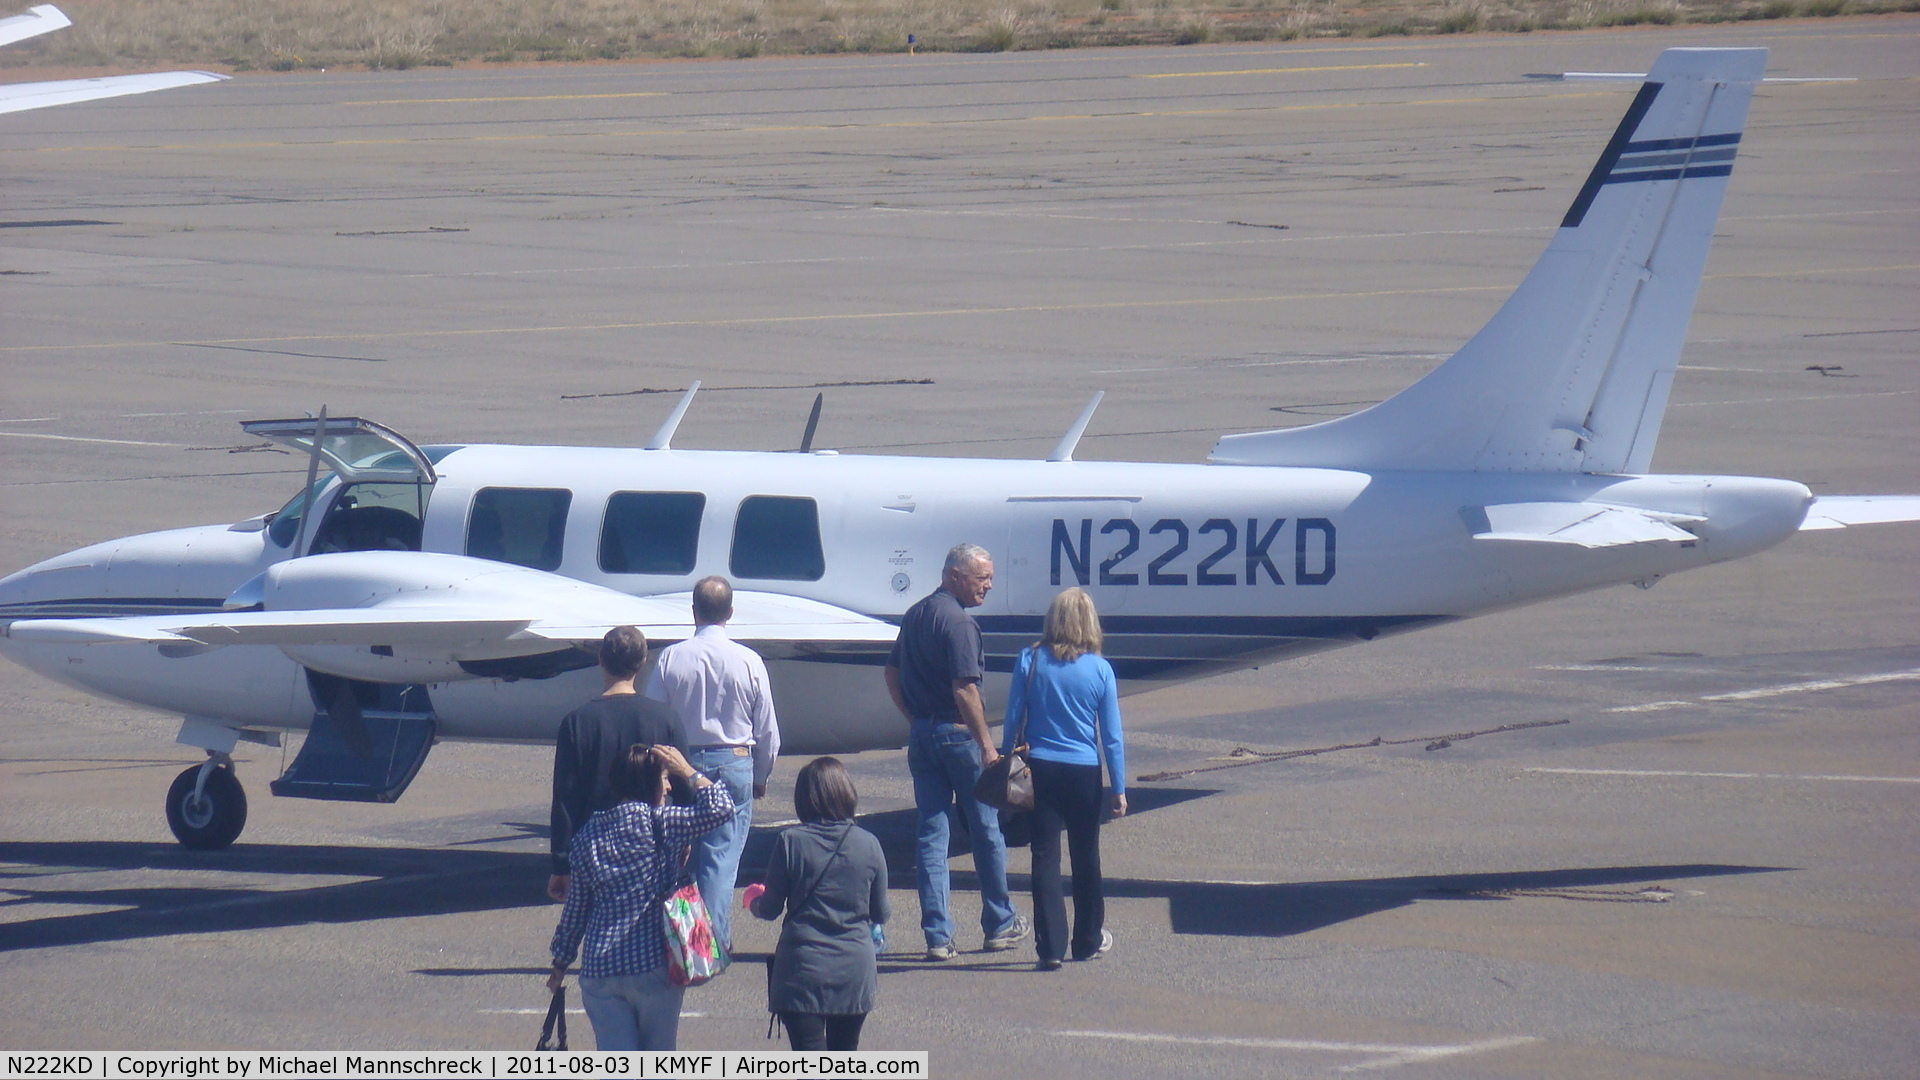 N222KD, Piper Aerostar 600 C/N 60-0557-181, Pilot and passangers Walking to The airplane